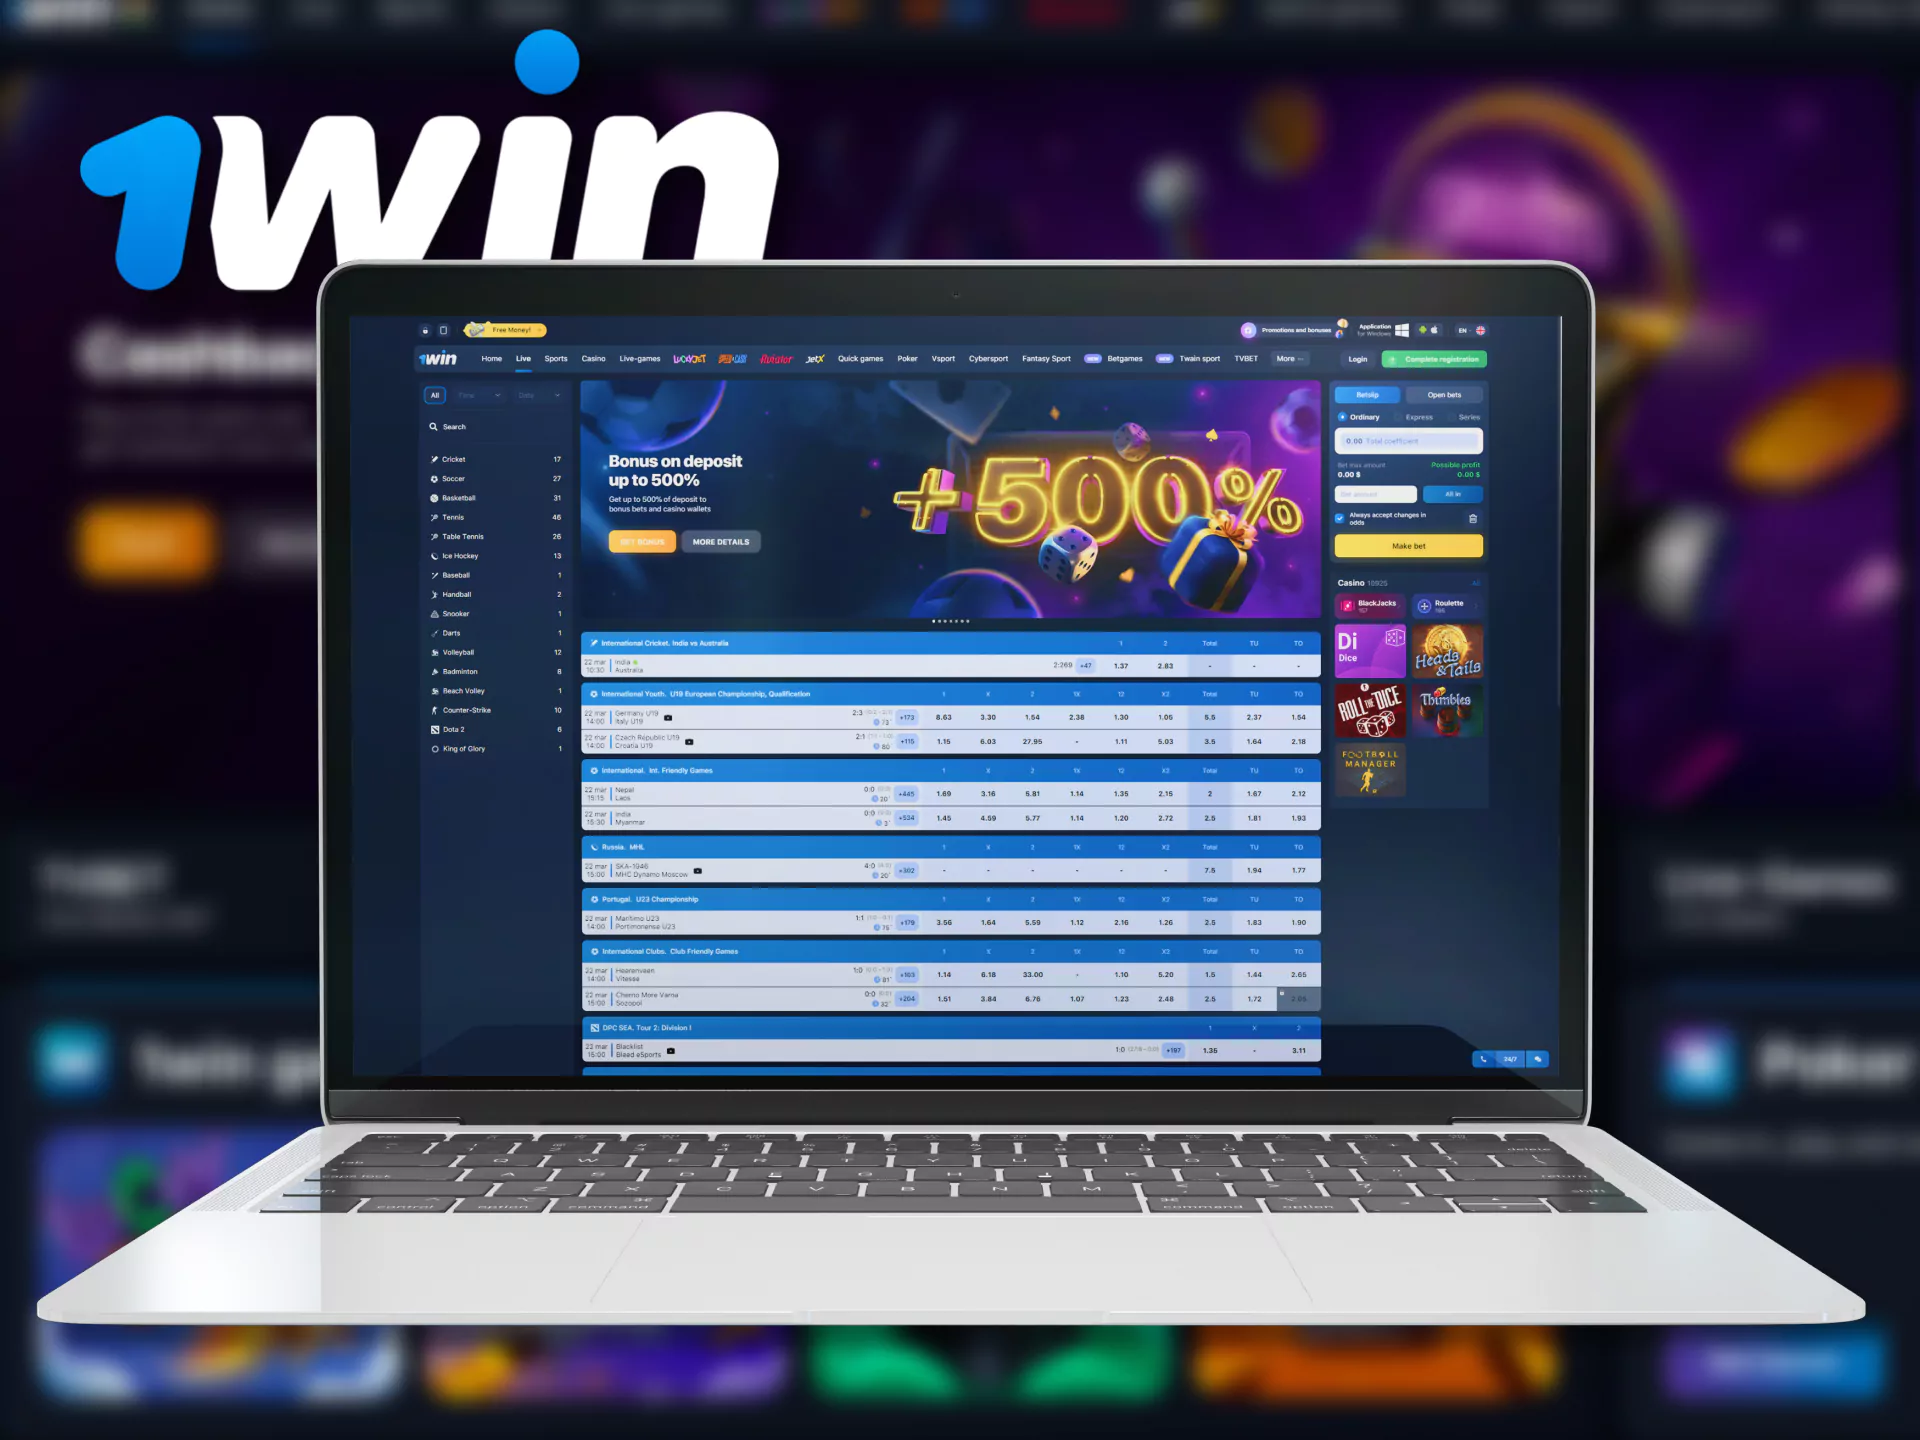 At 1Win, make your bets through the handy official website.